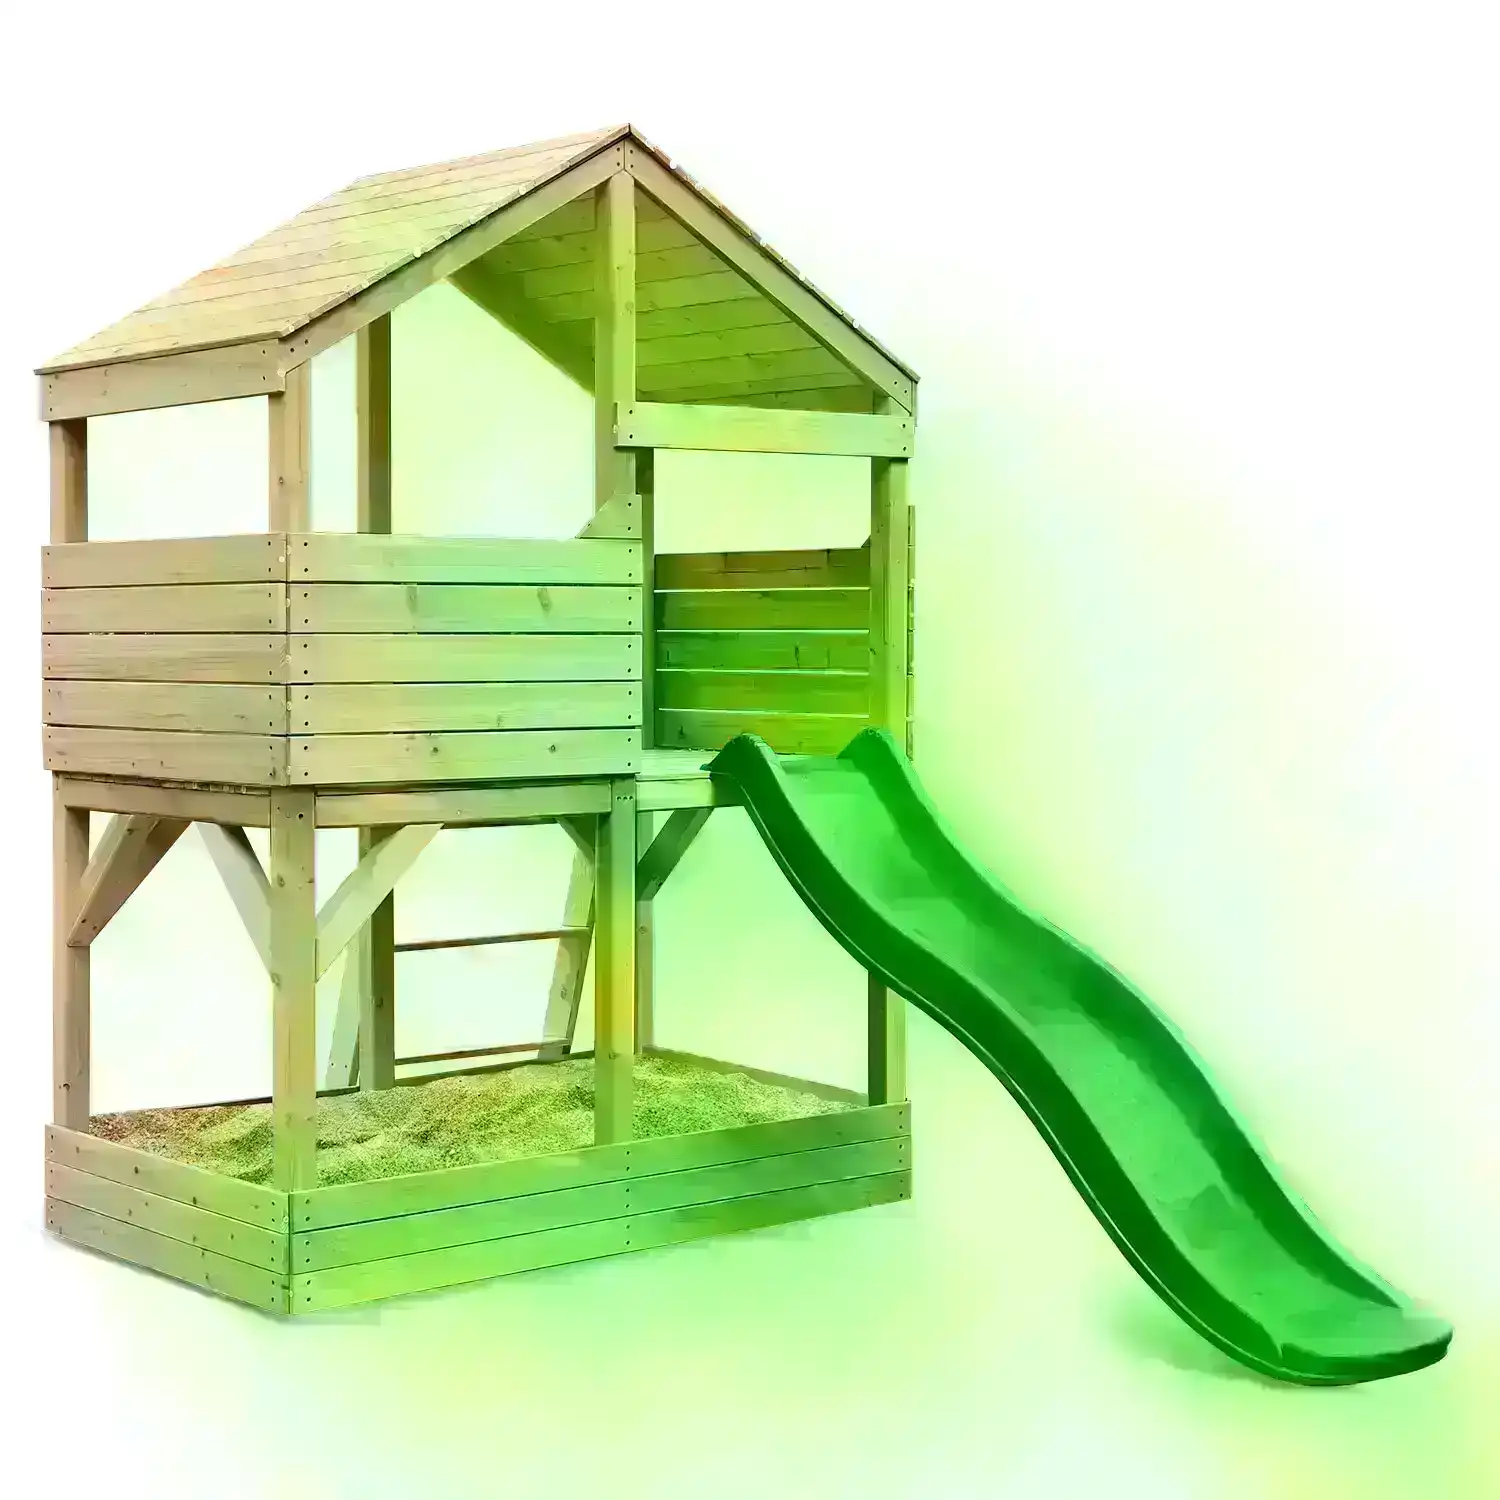 Lifespan Kids Bentley Cubby House with 1.8m Slide